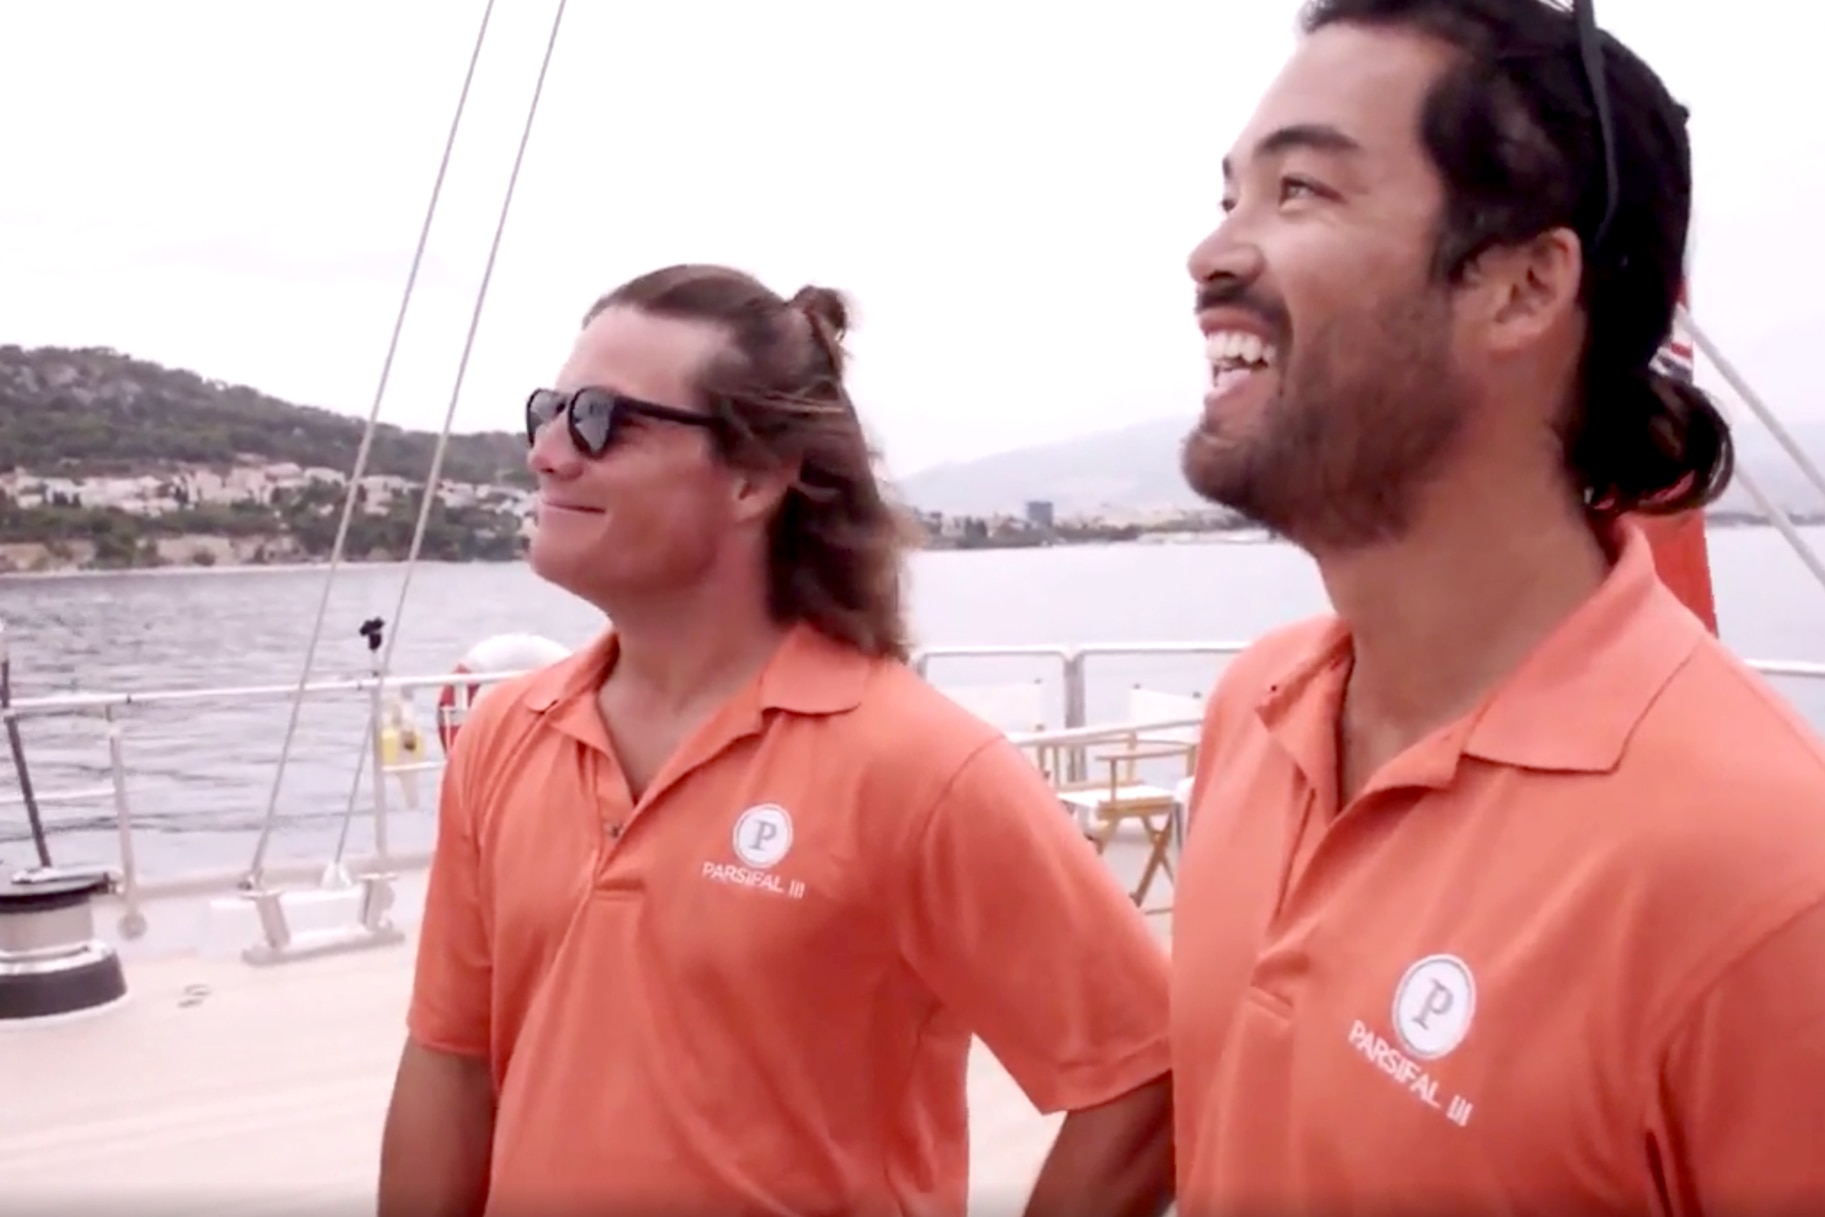 Below Deck Sailing Yacht Charter Guest Calls Out Crew for